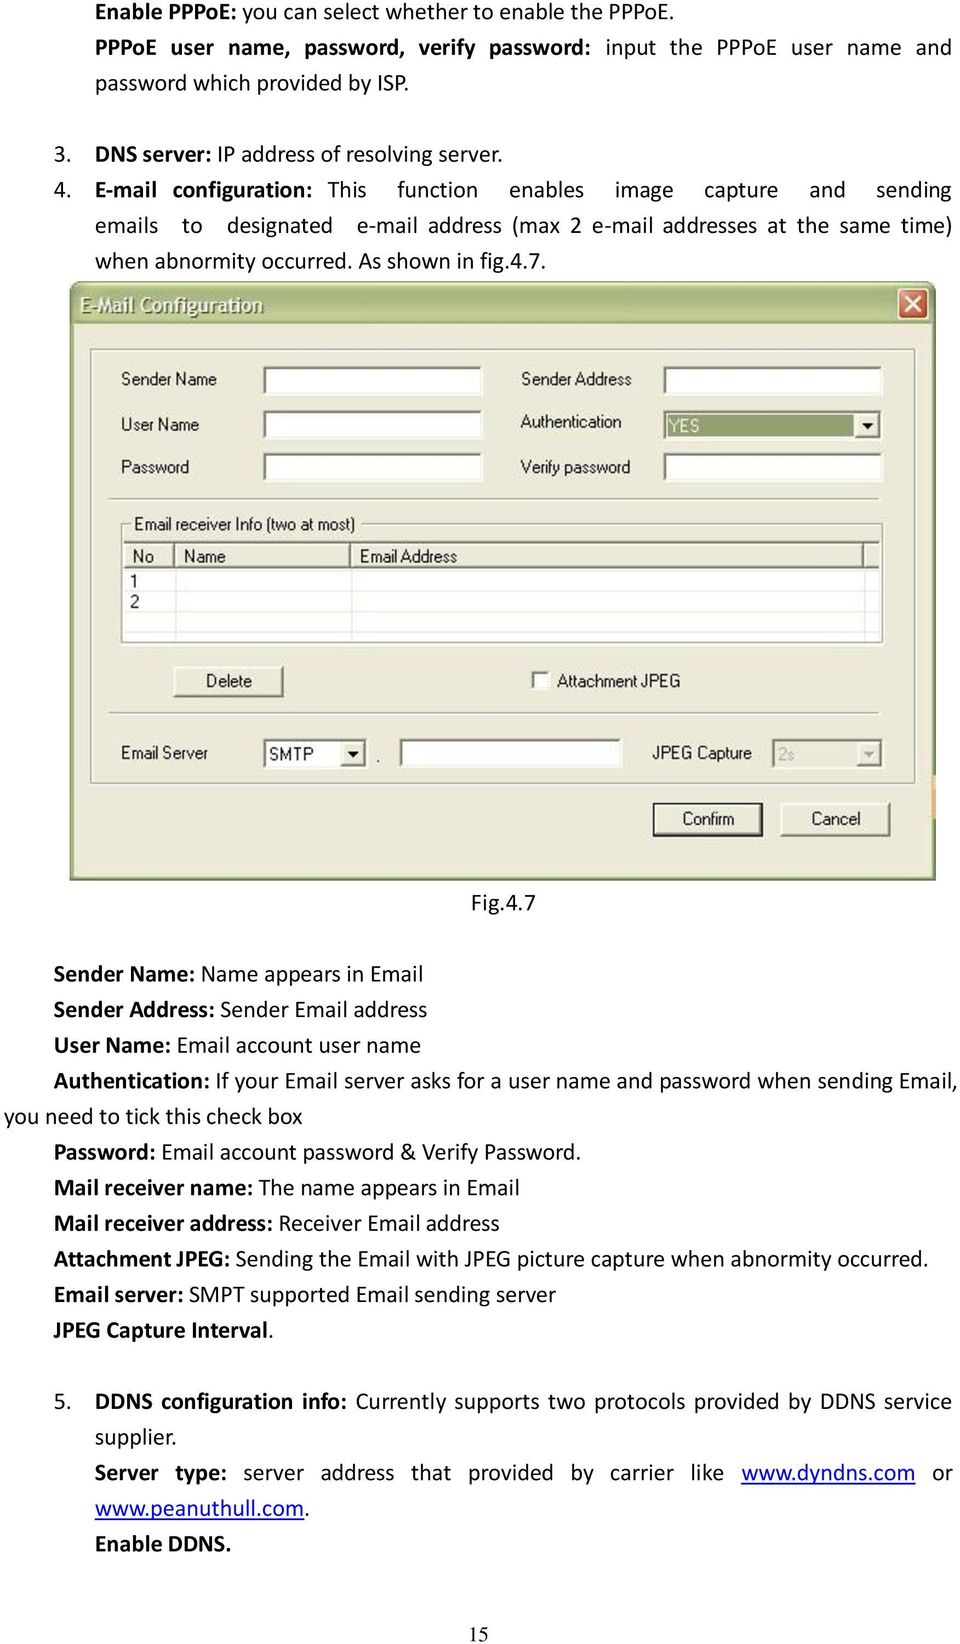 E-mail configuration: This function enables image capture and sending emails to designated e-mail address (max 2 e-mail addresses at the same time) when abnormity occurred. As shown in fig.4.